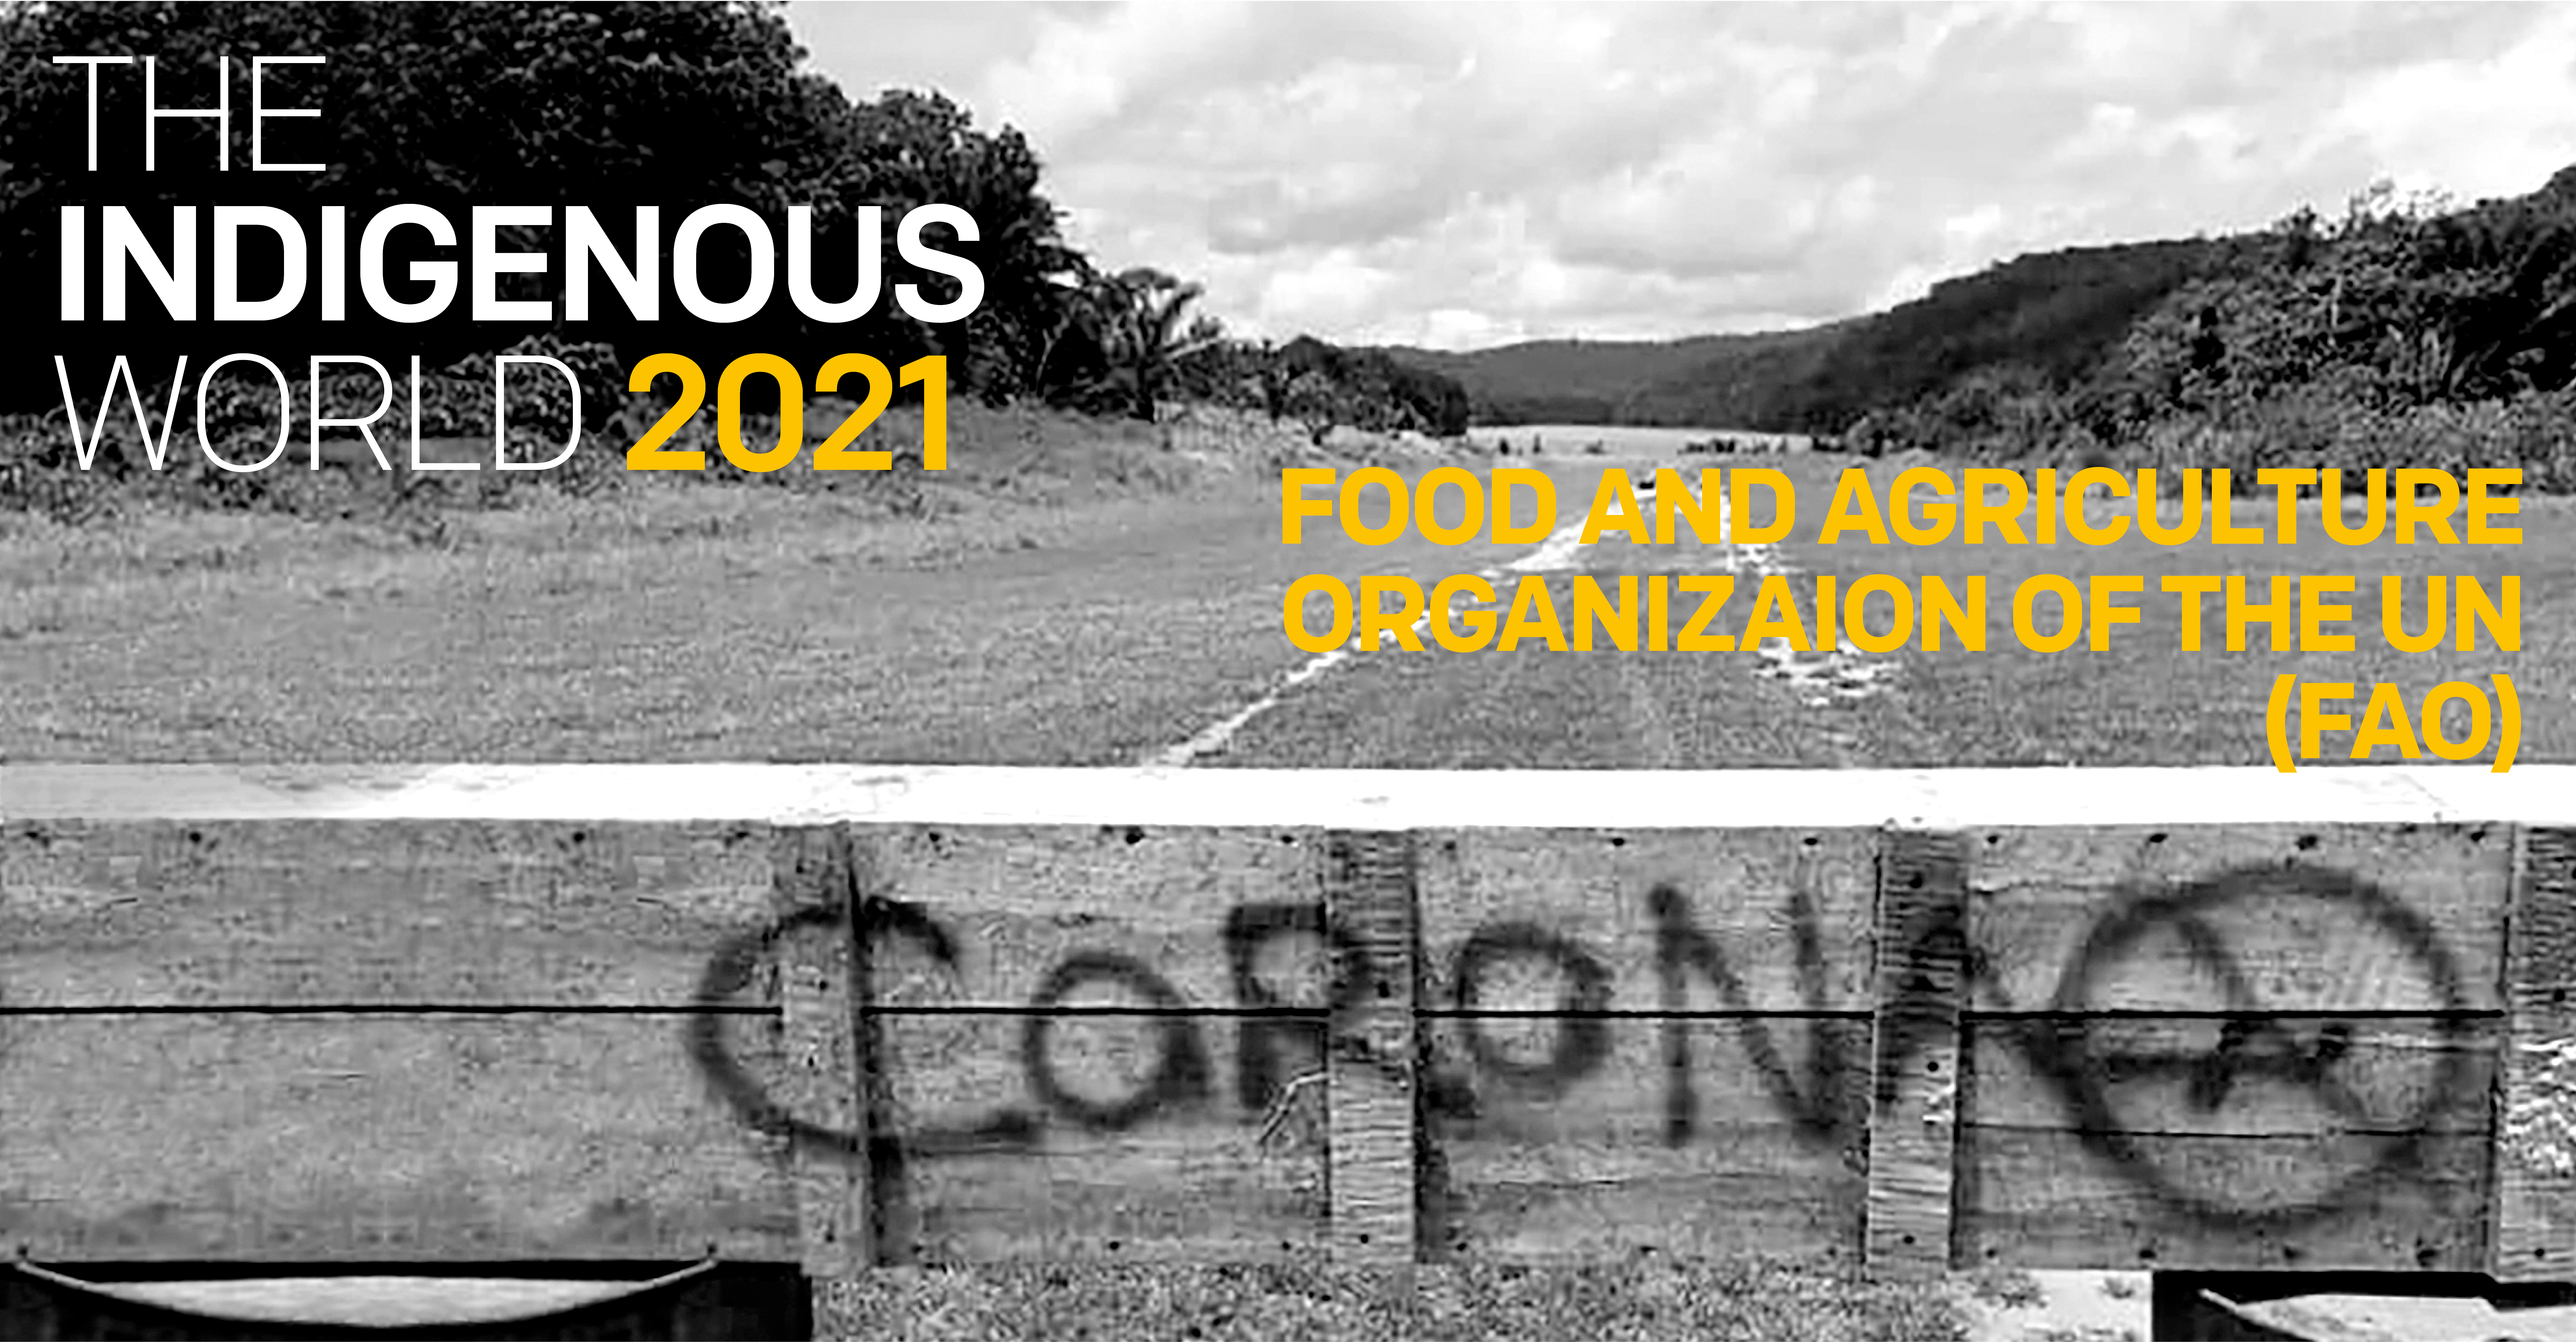 Food and Agricultural Organization of the United Nations (FAO) and Indigenous Peoples